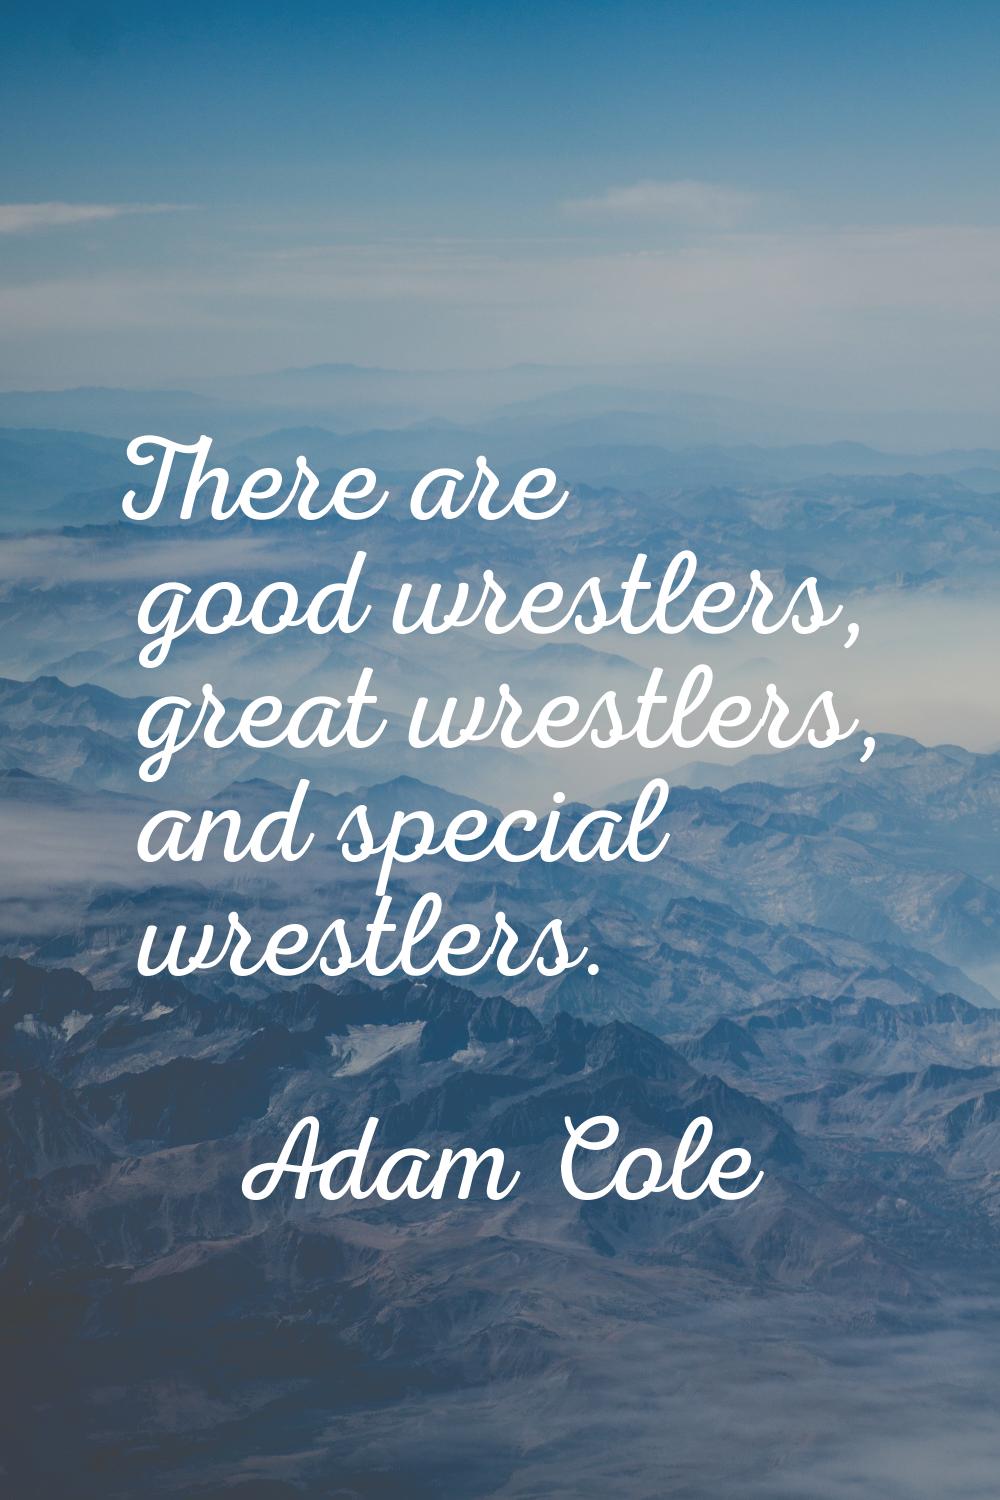 There are good wrestlers, great wrestlers, and special wrestlers.